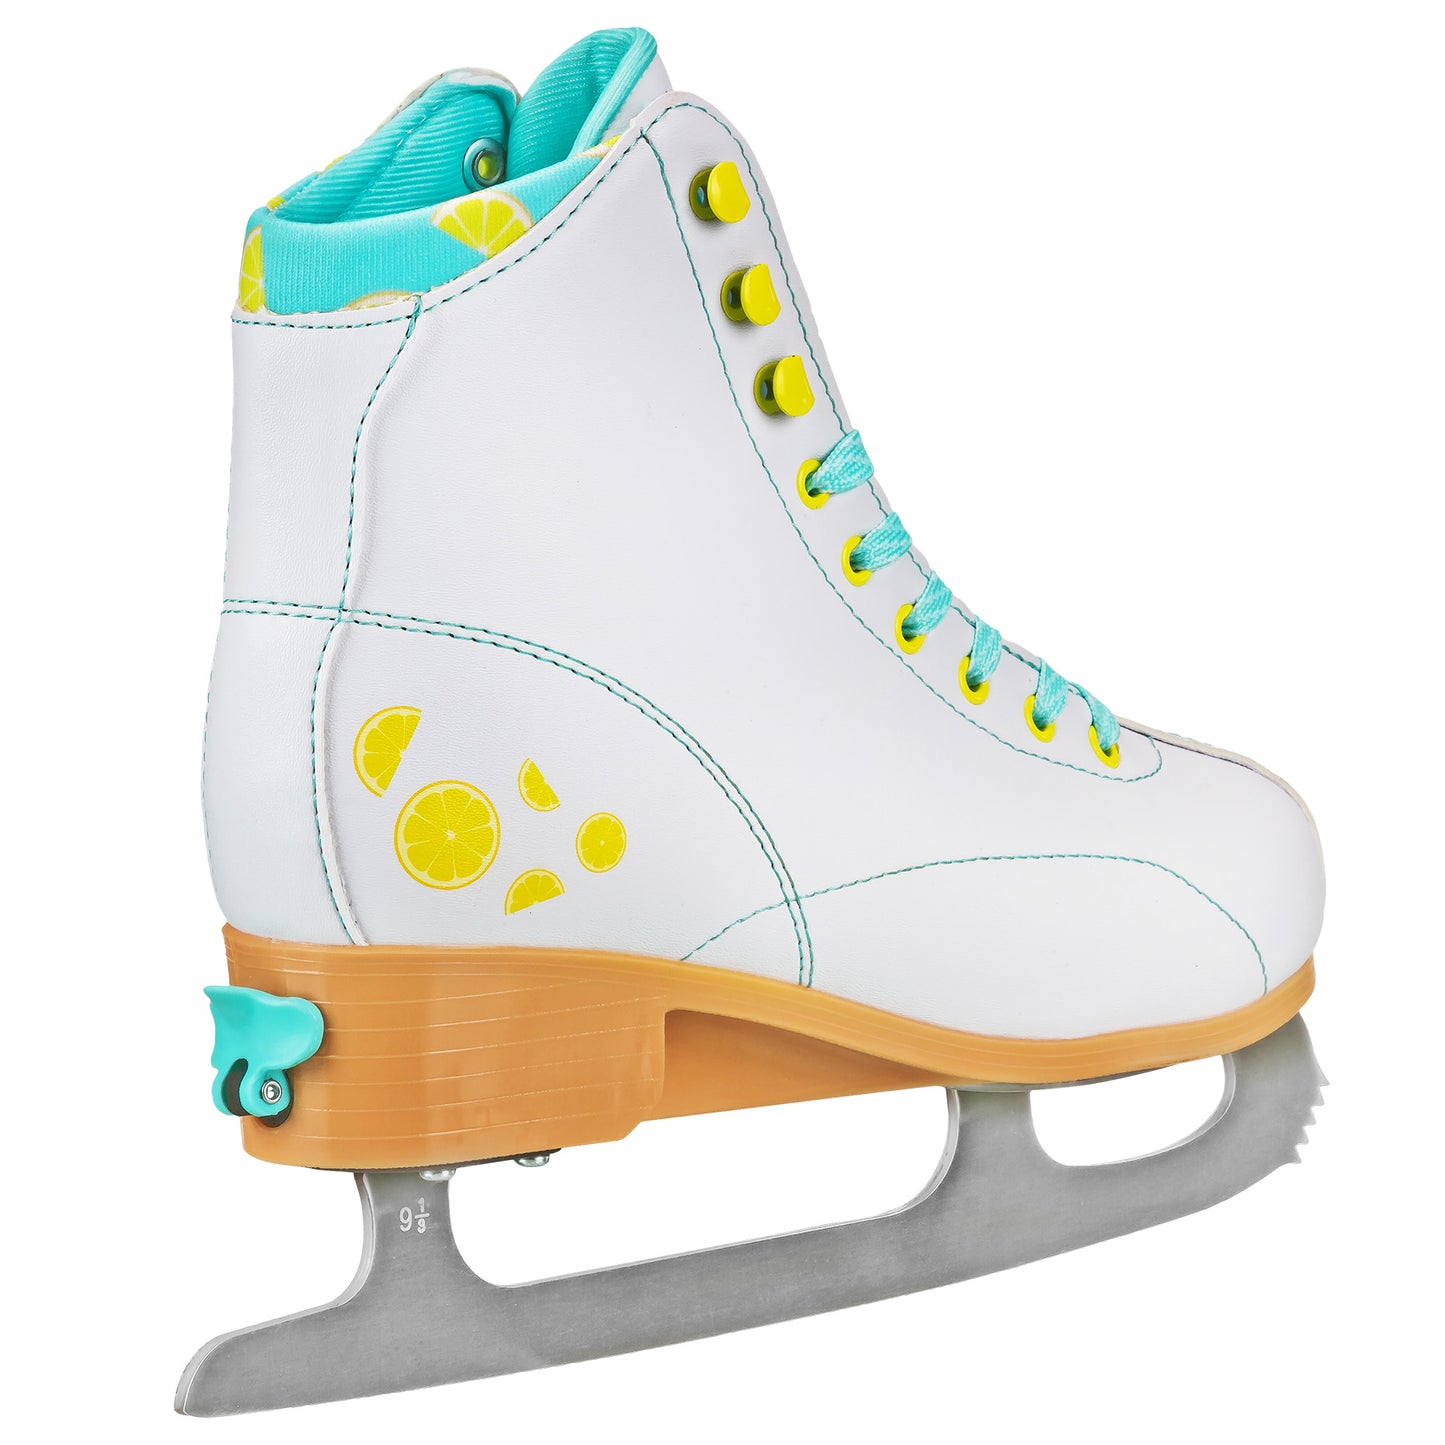 Lucy Girl's Adjustable Ice Skates